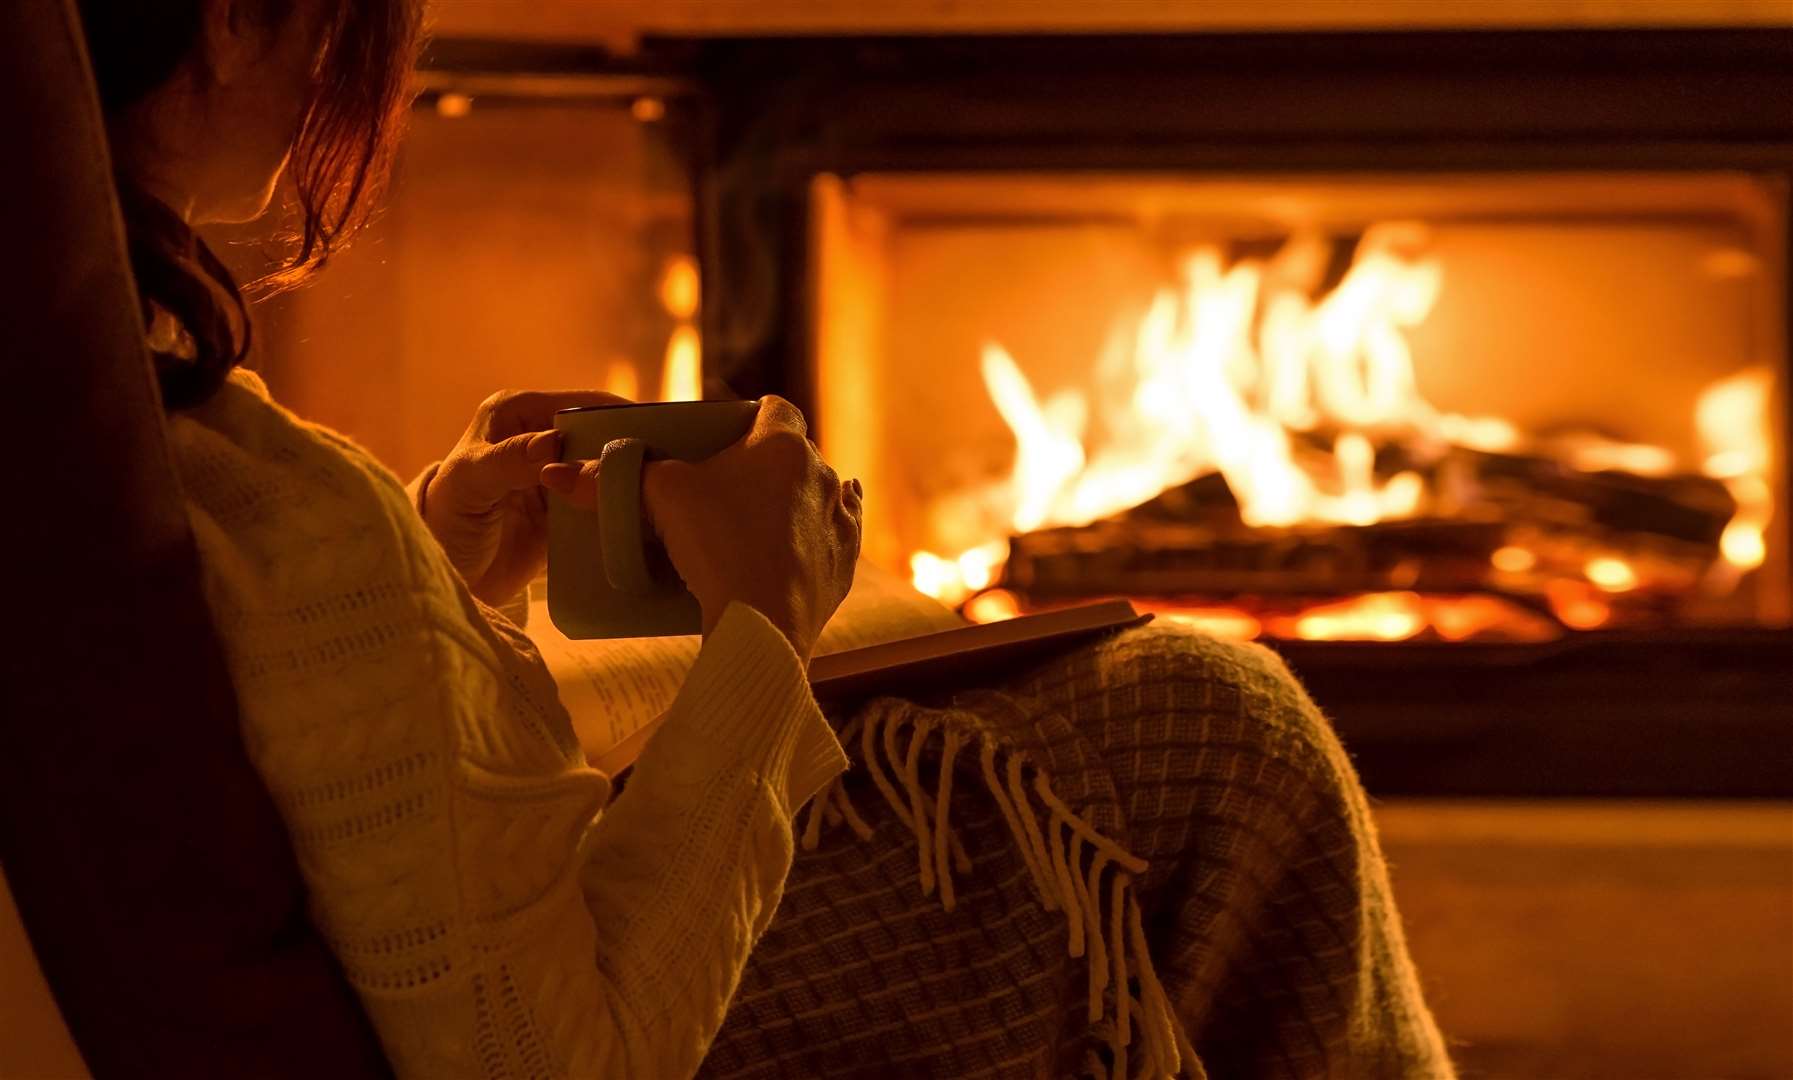 One-off winter payments are available this season to help offset your heating costs.